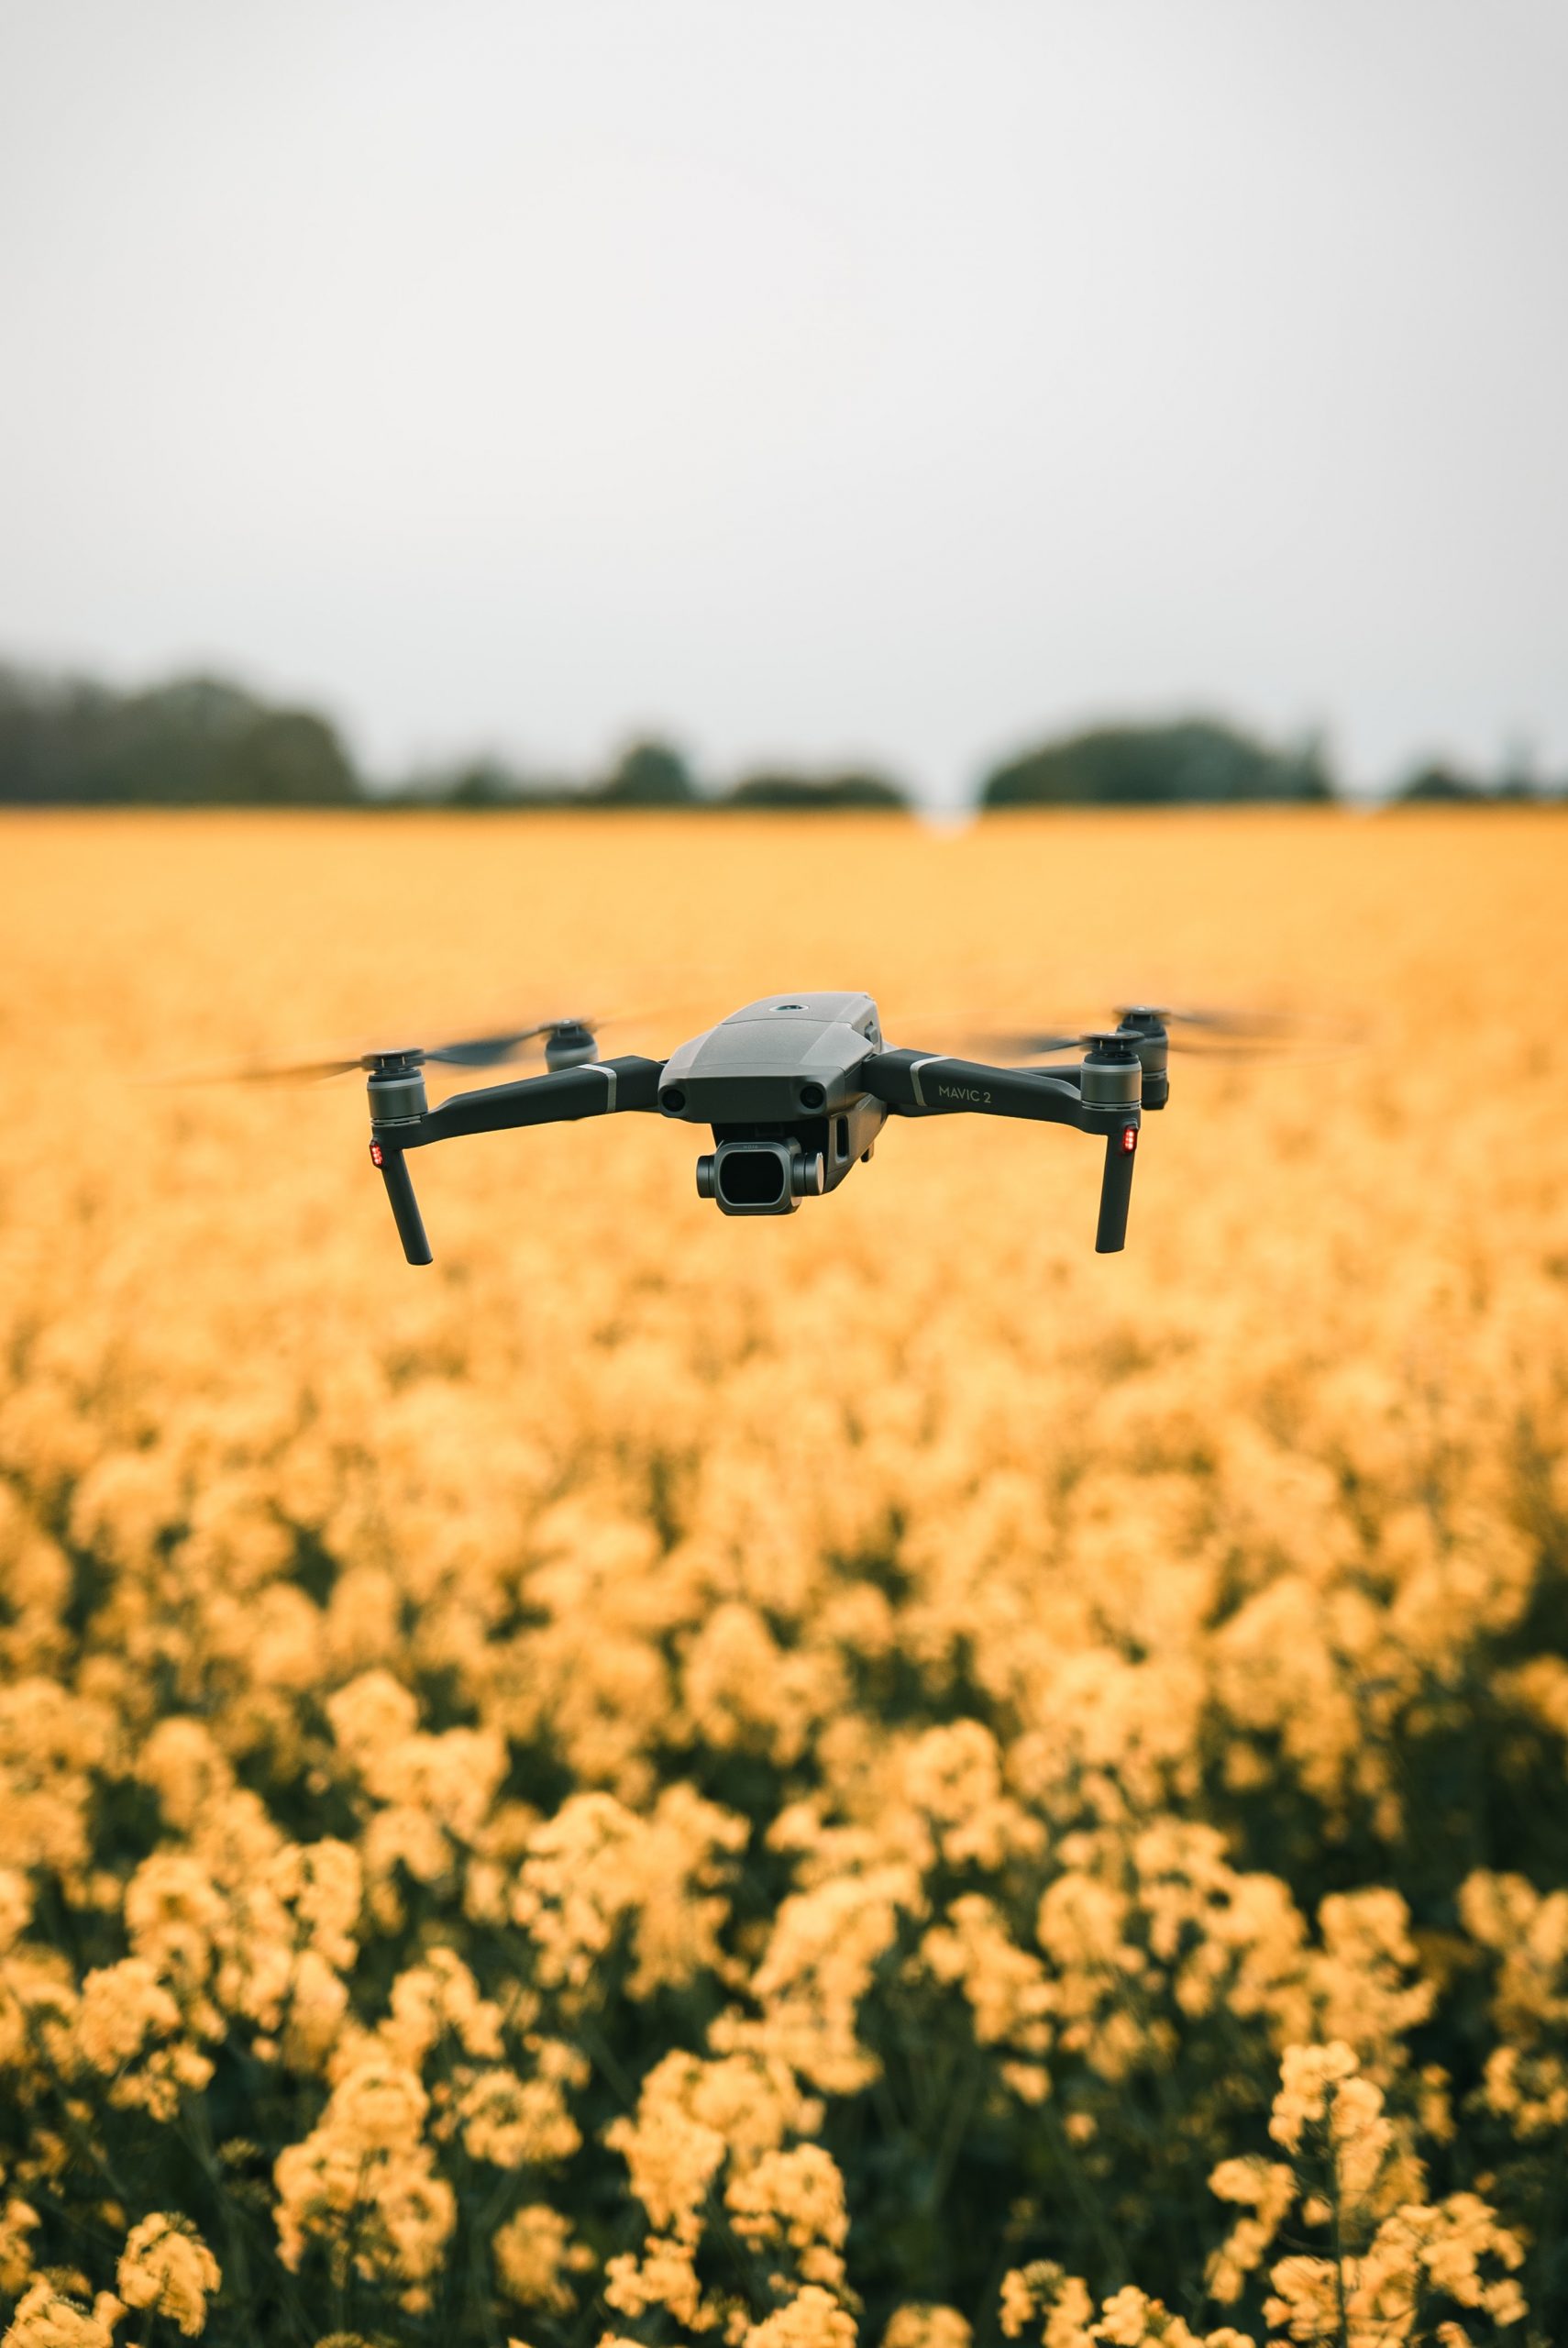 Drones are used in agriculture and farming for scanning and mapping fields, identifying disease and allowing farmers to make informed decisions.